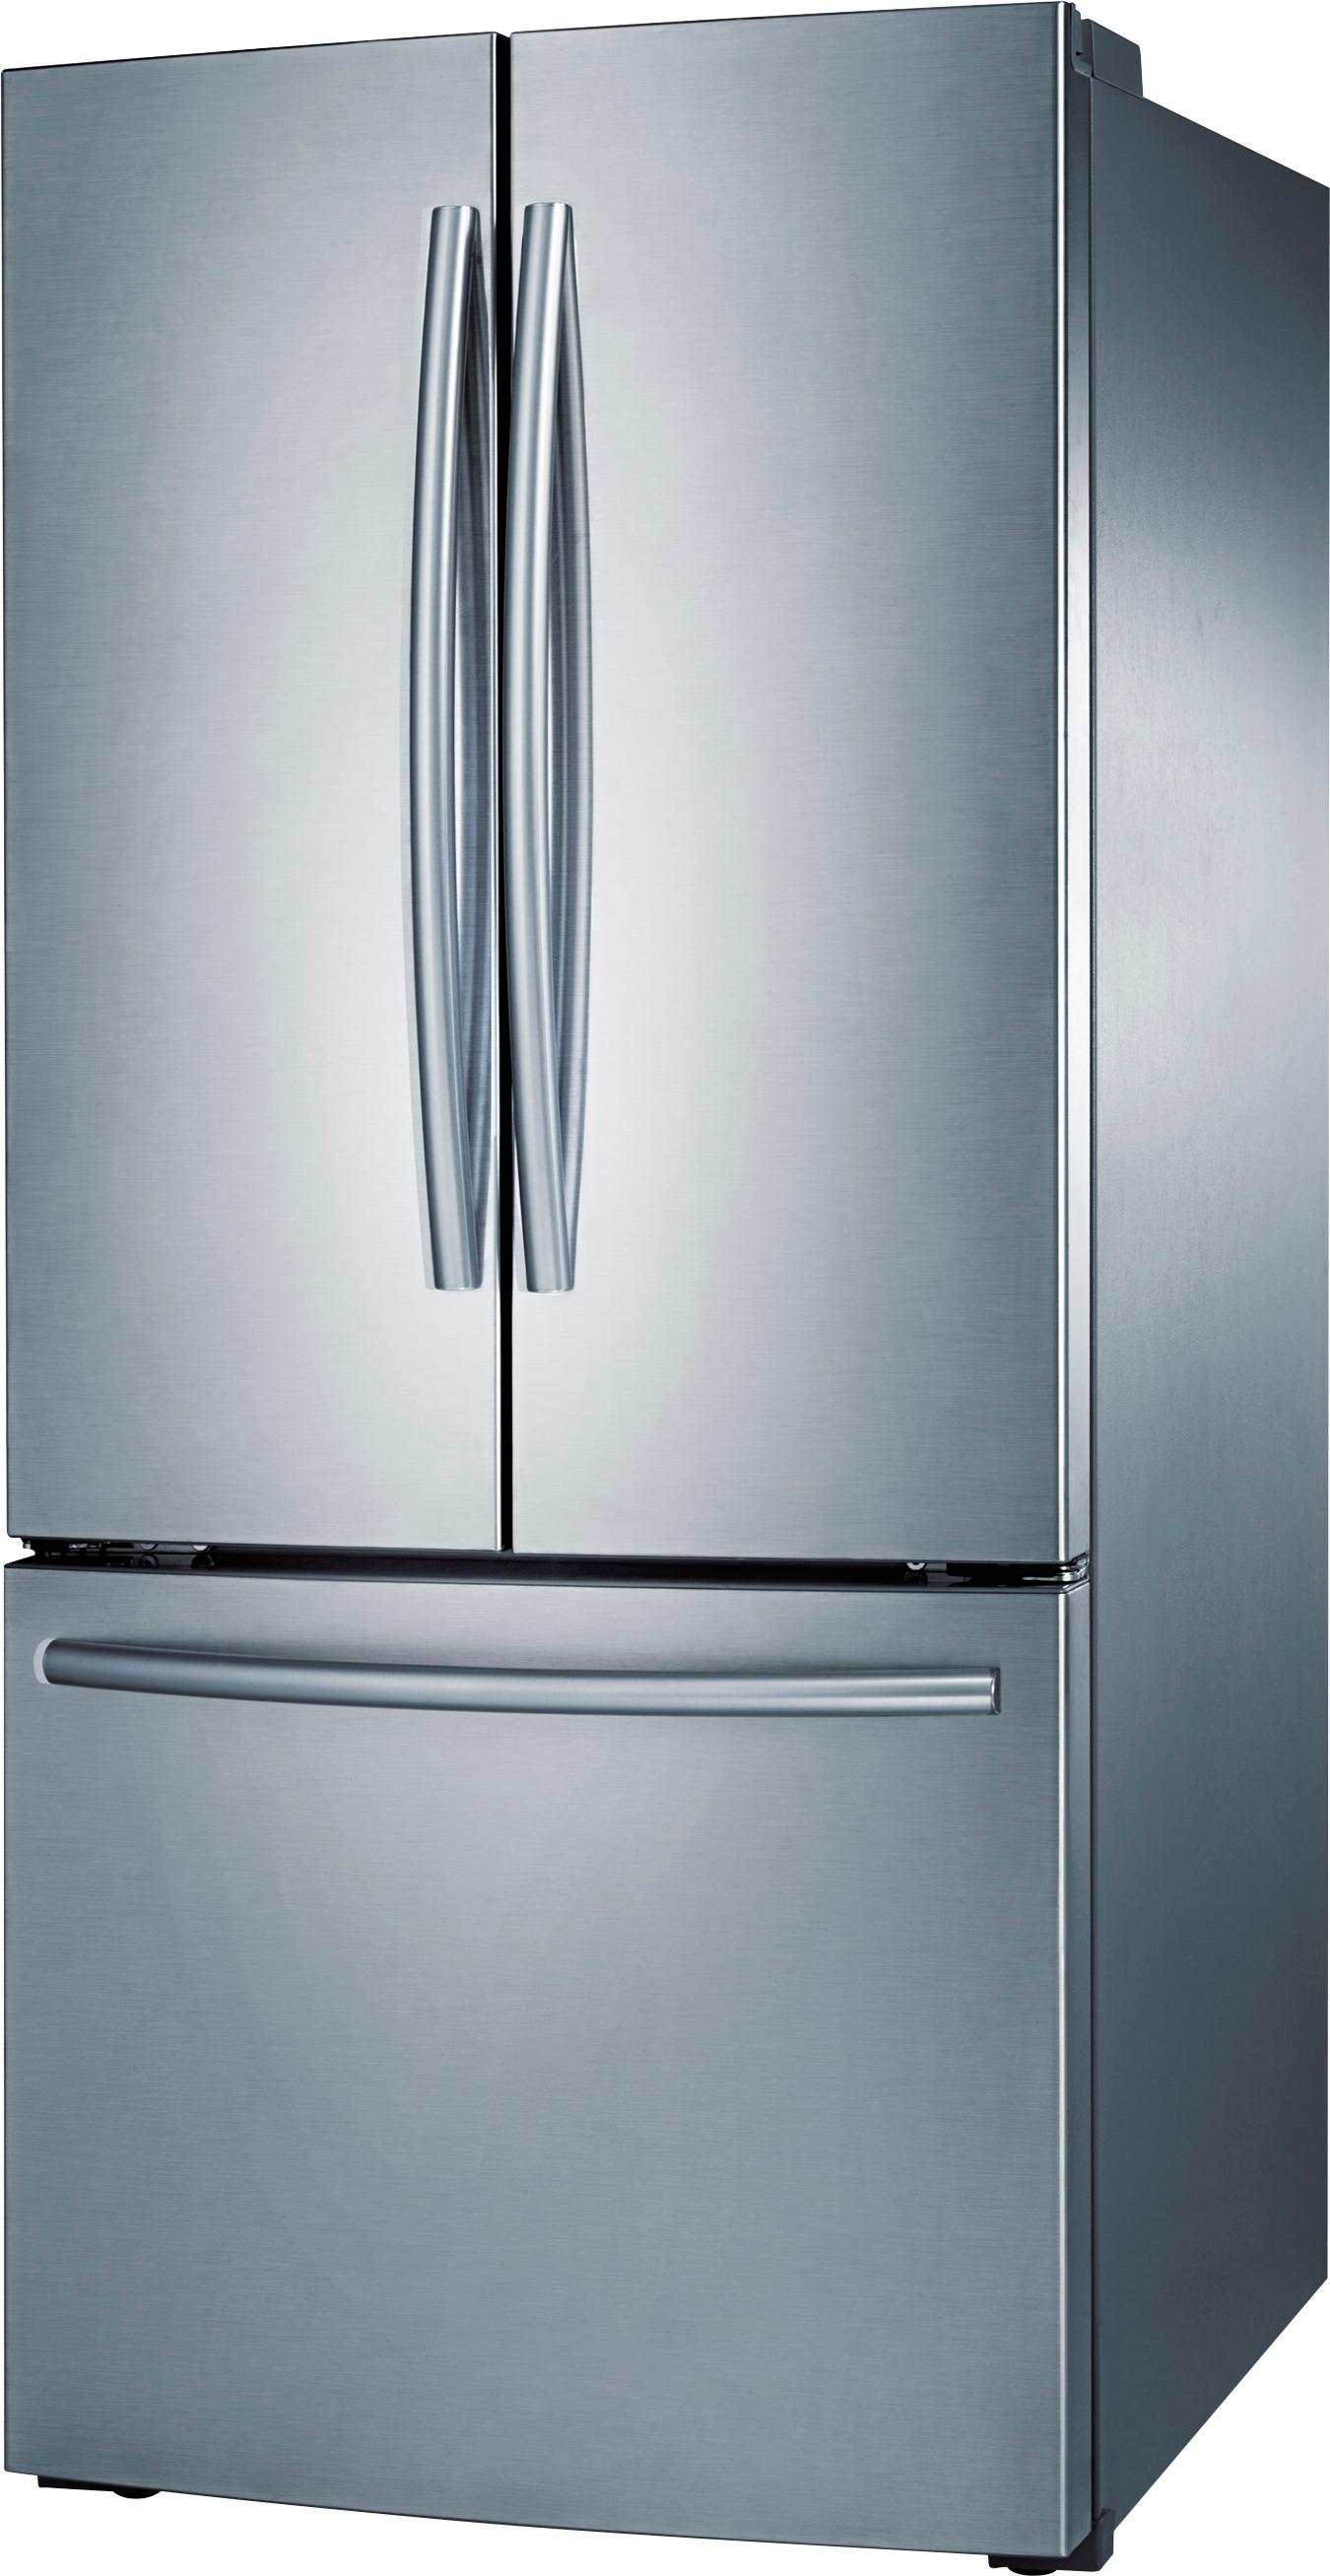 Left View: Samsung - 21.8 Cu. Ft. French-Door Refrigerator - Stainless steel